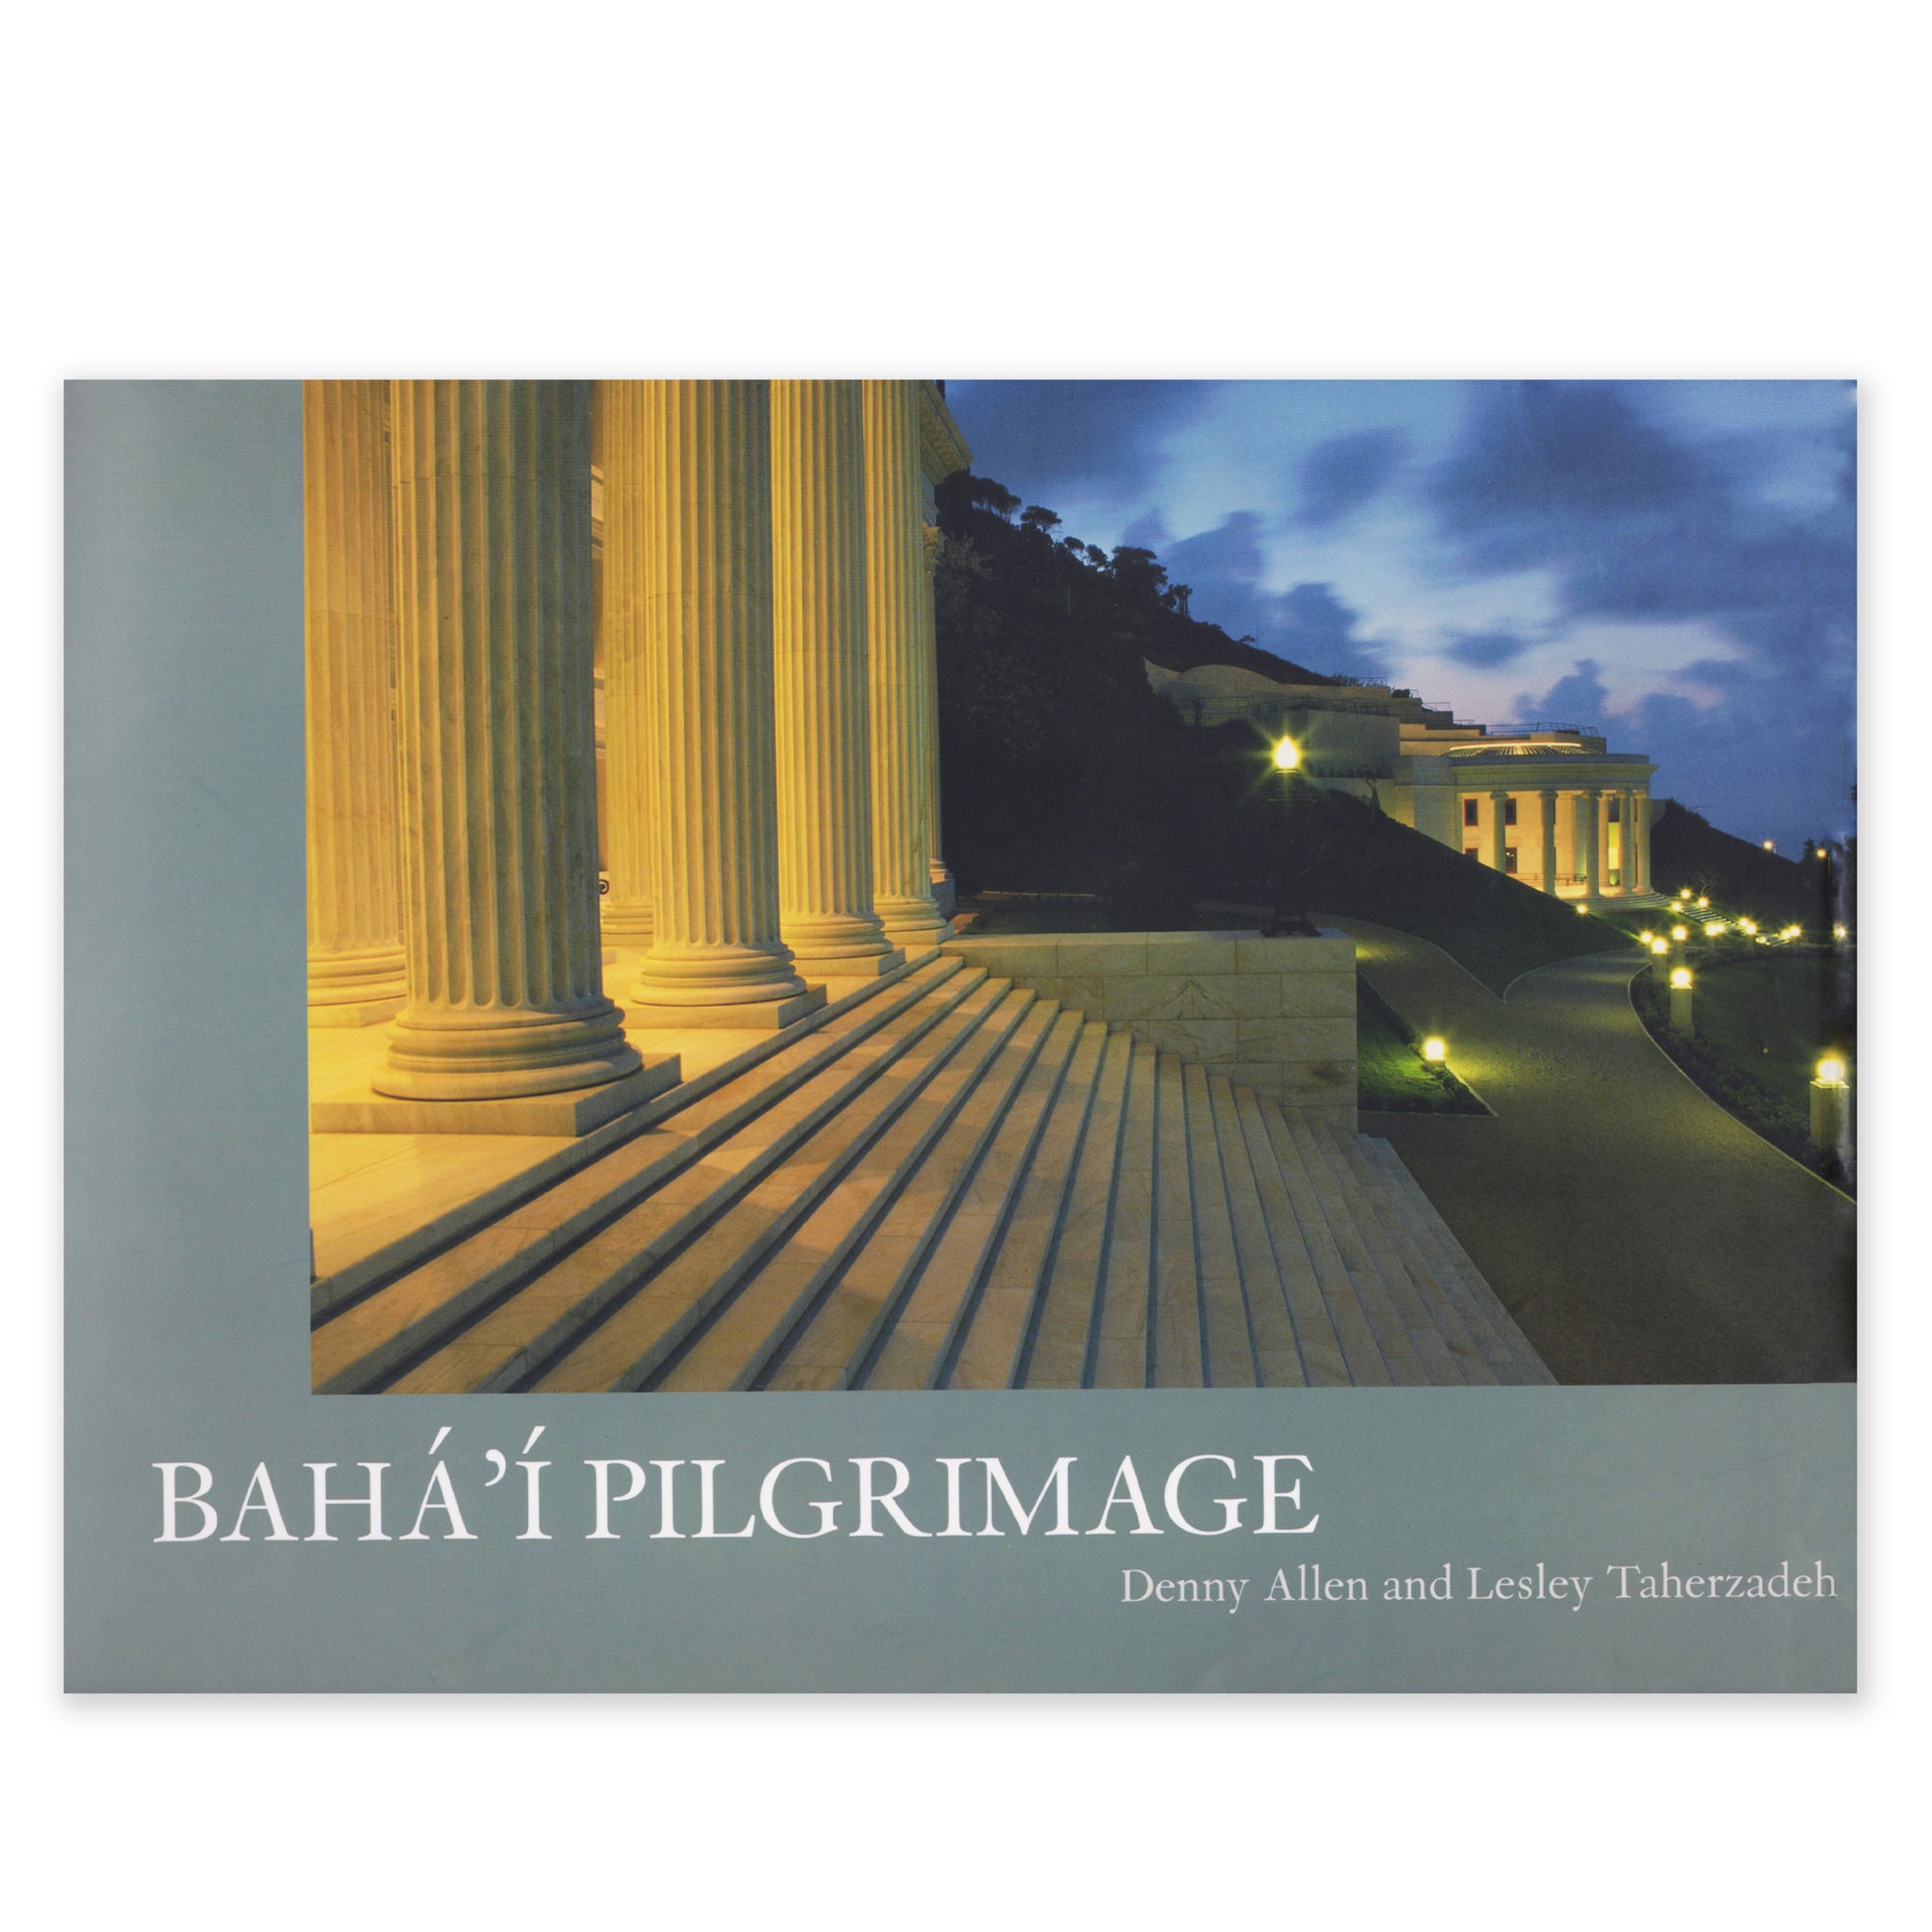 Baha'i Pilgrimage - Pictoral Journey through the Holy Places